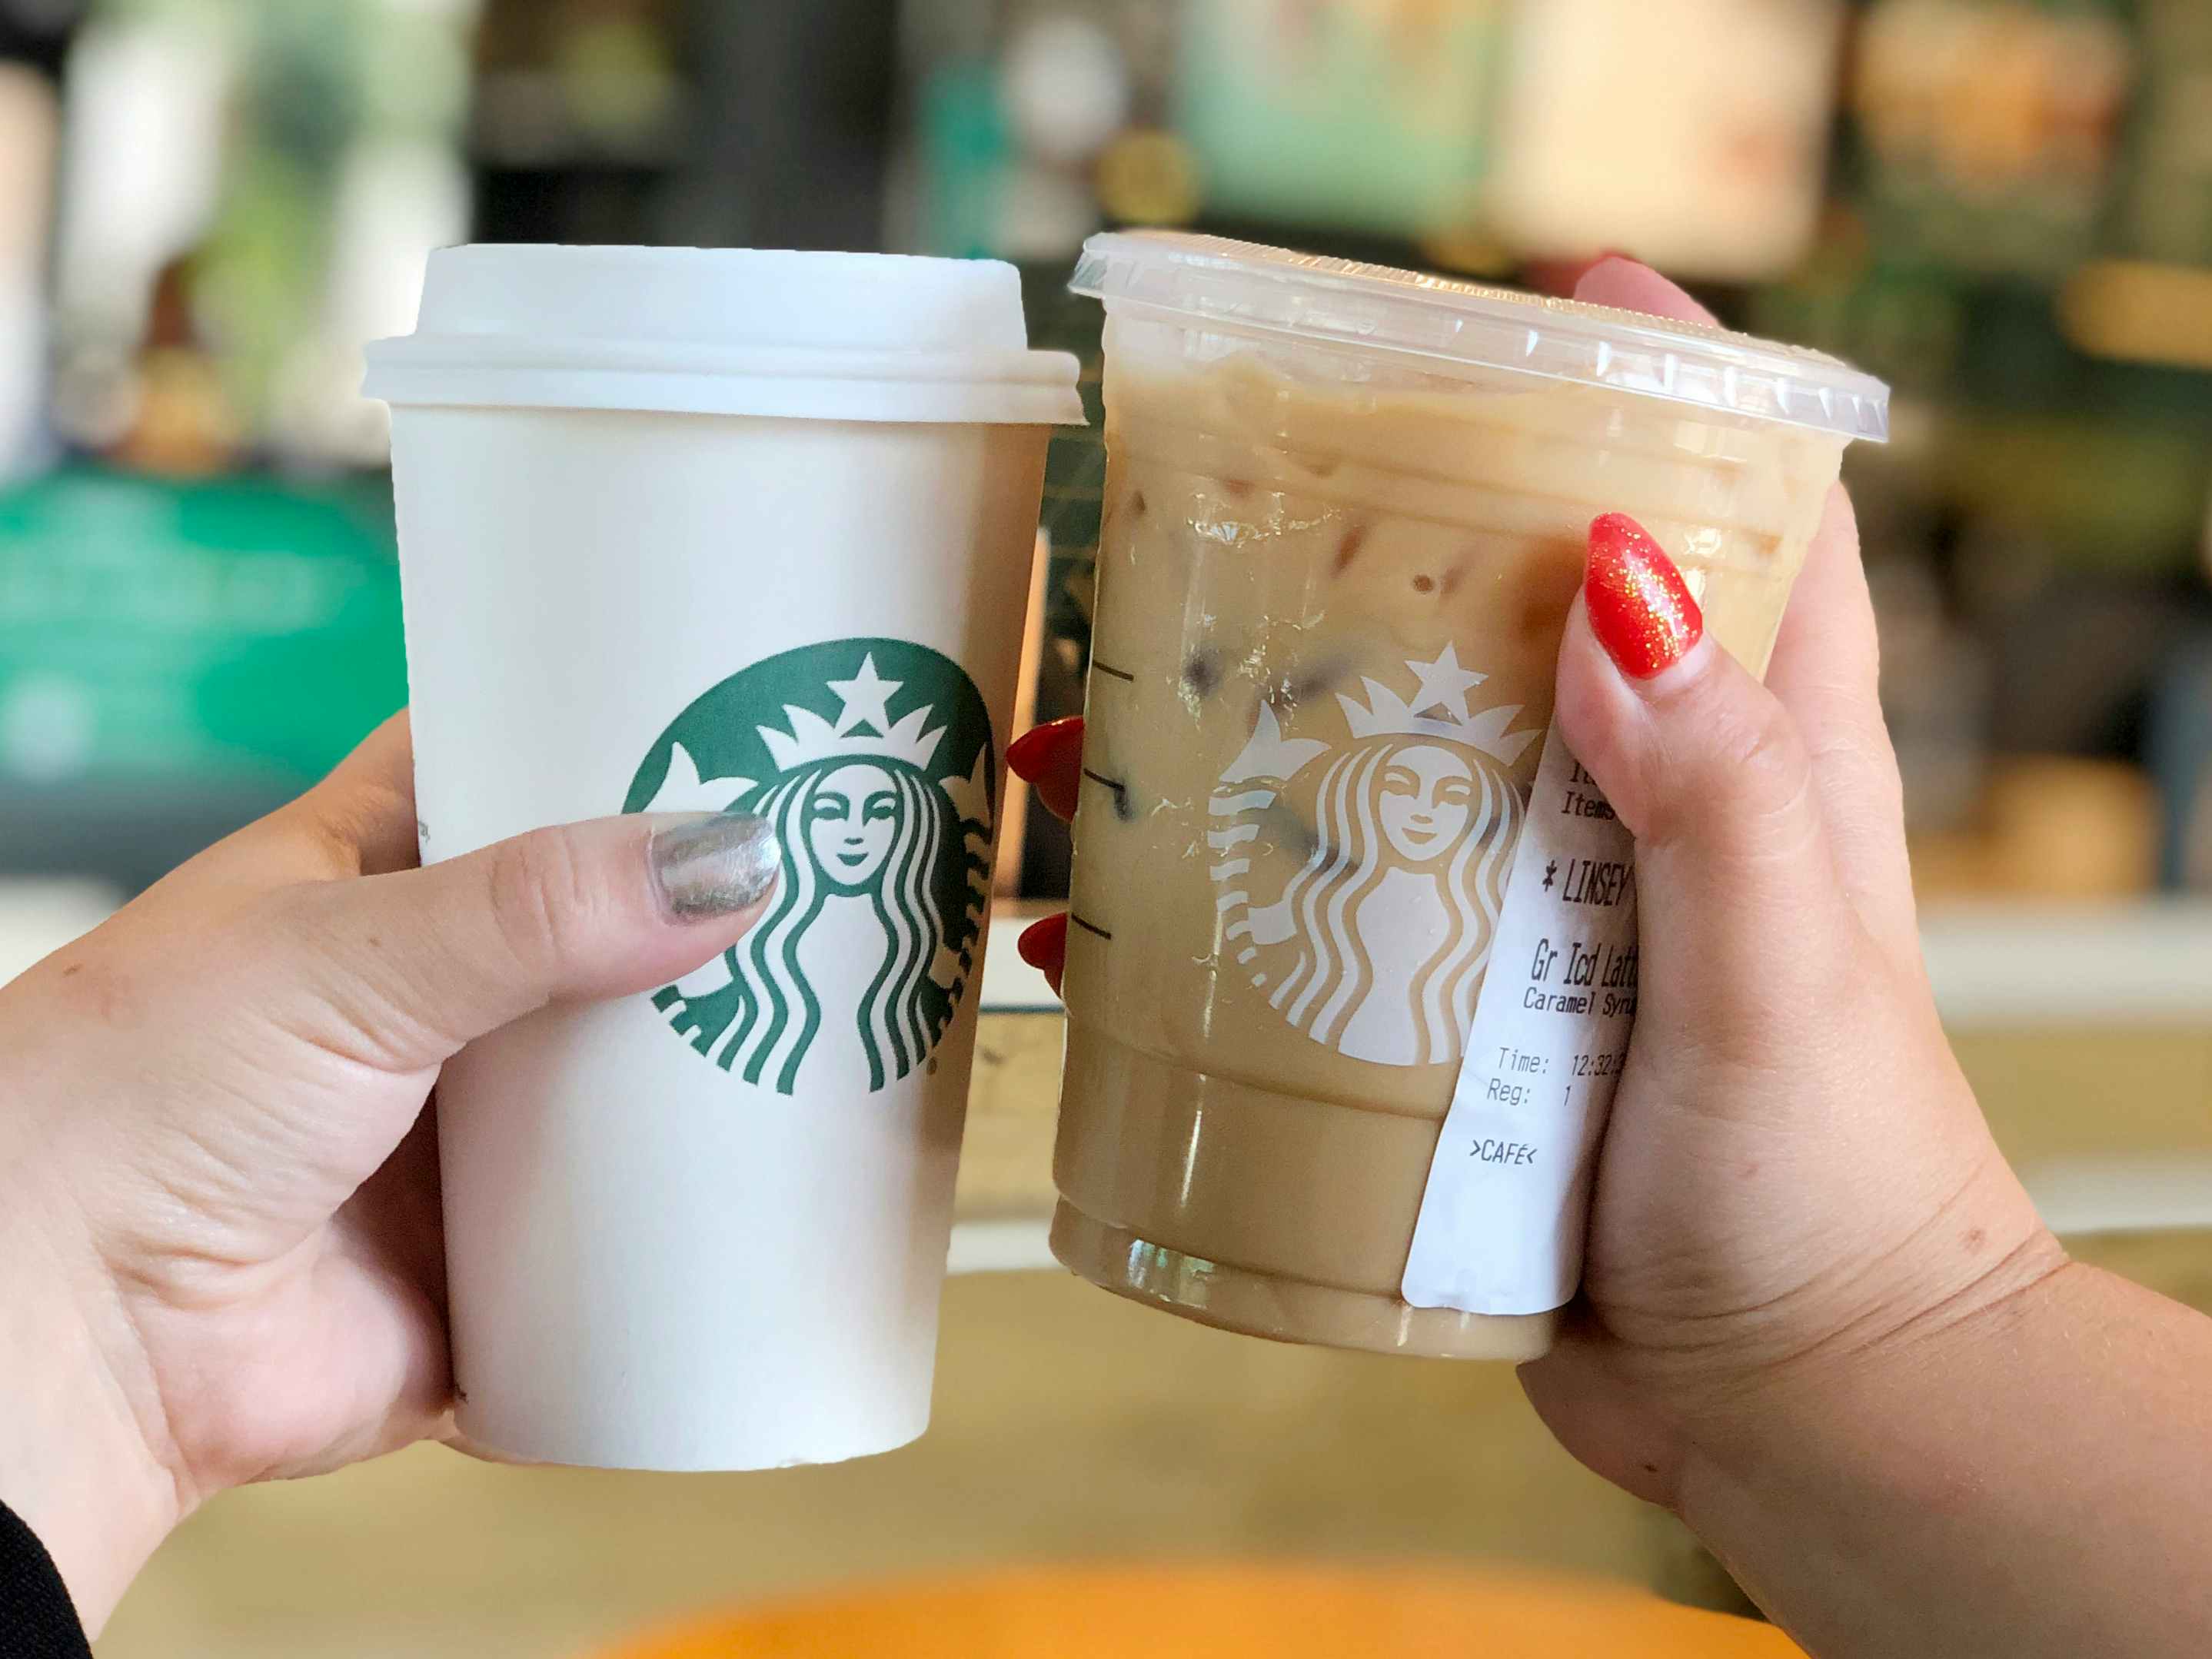 Two people's hands holding two Starbucks drinks up together.